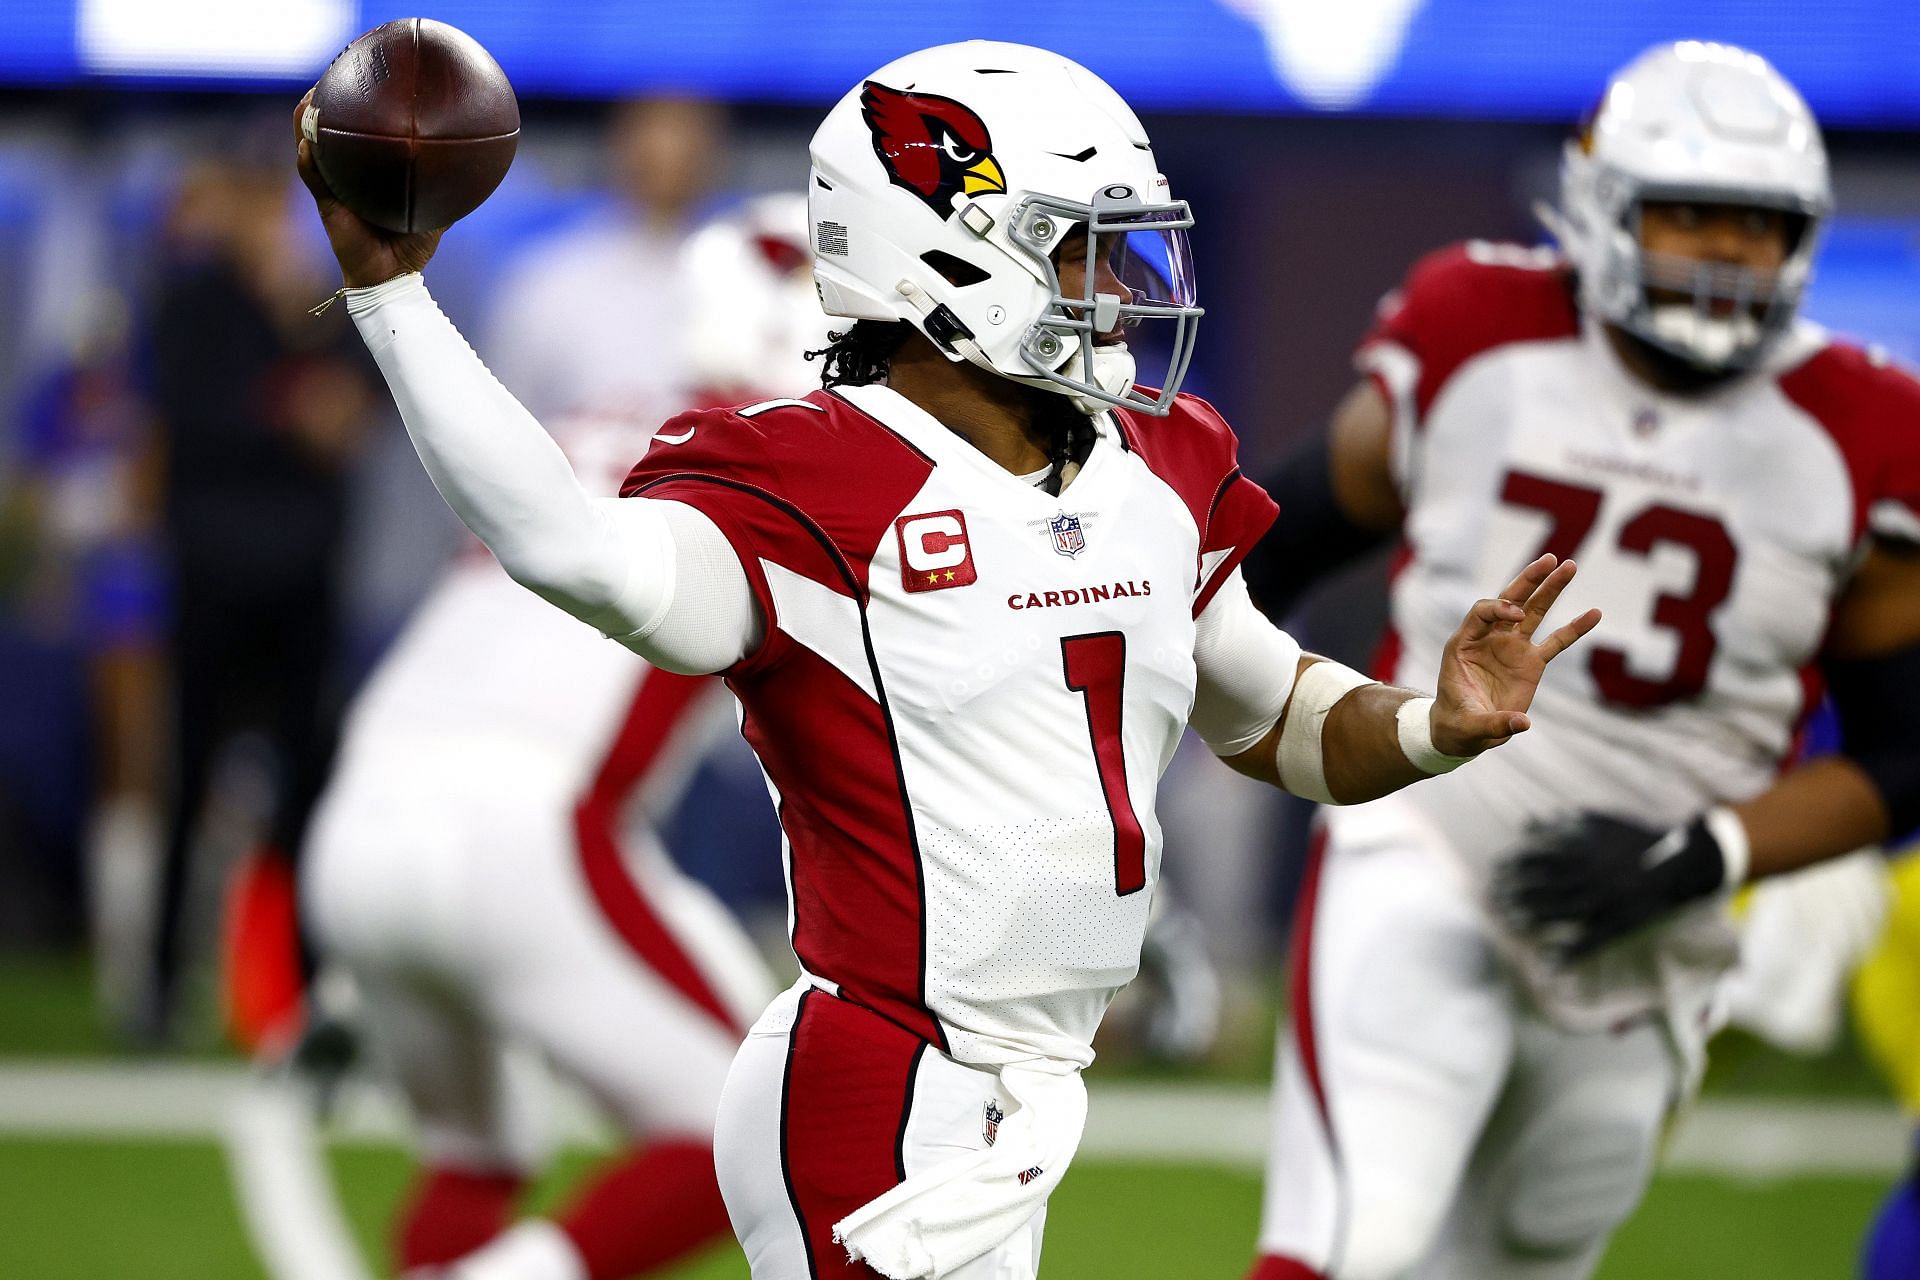 Kyler Murray might see a drop in his NFL performances despite a good last season